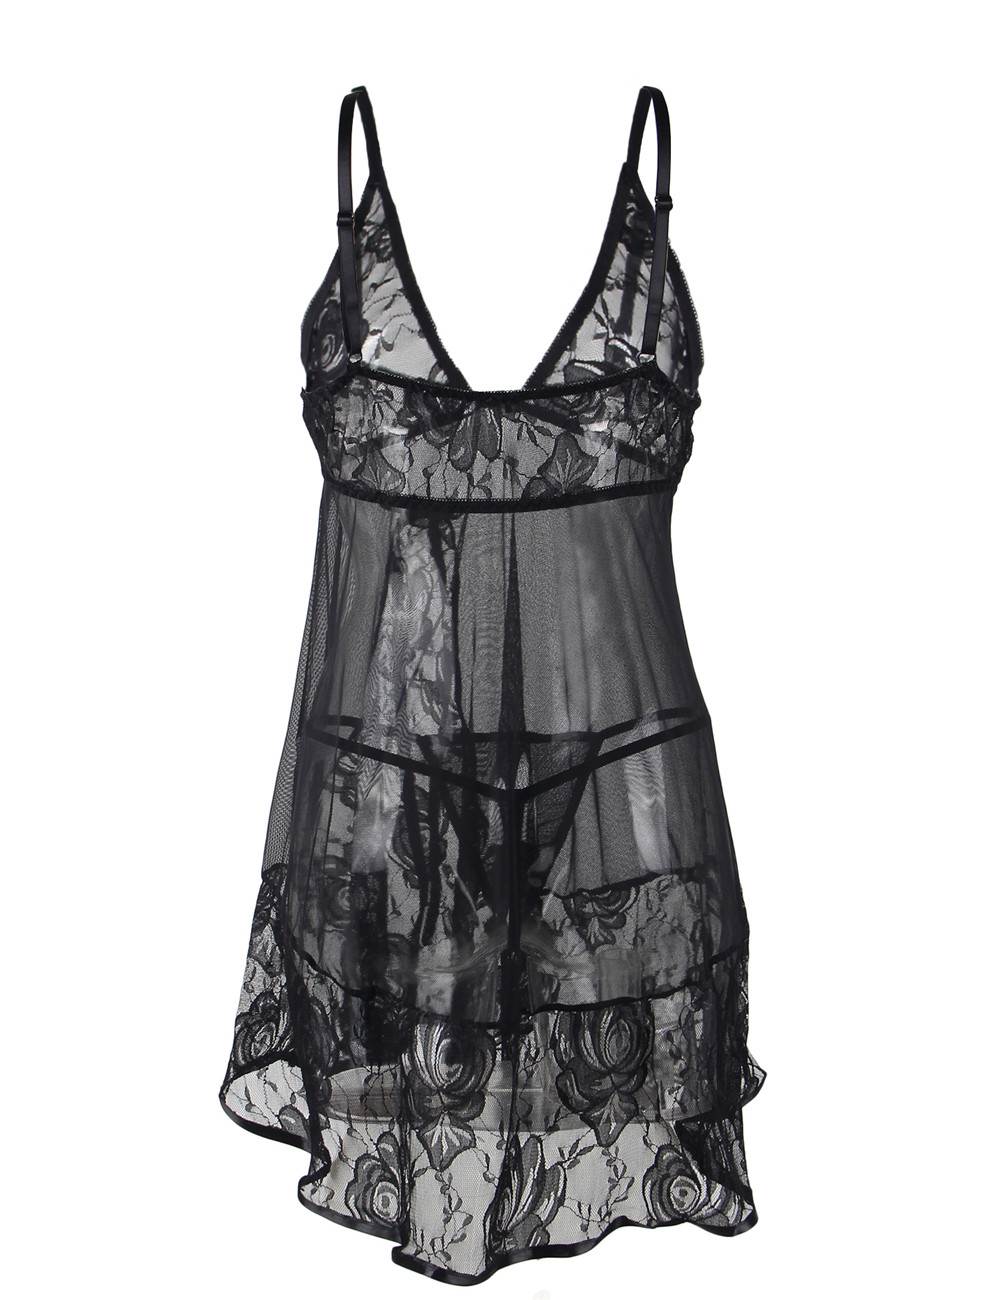 Floral Soft Lace Apron Chemise With Thong | Ohyeahlady